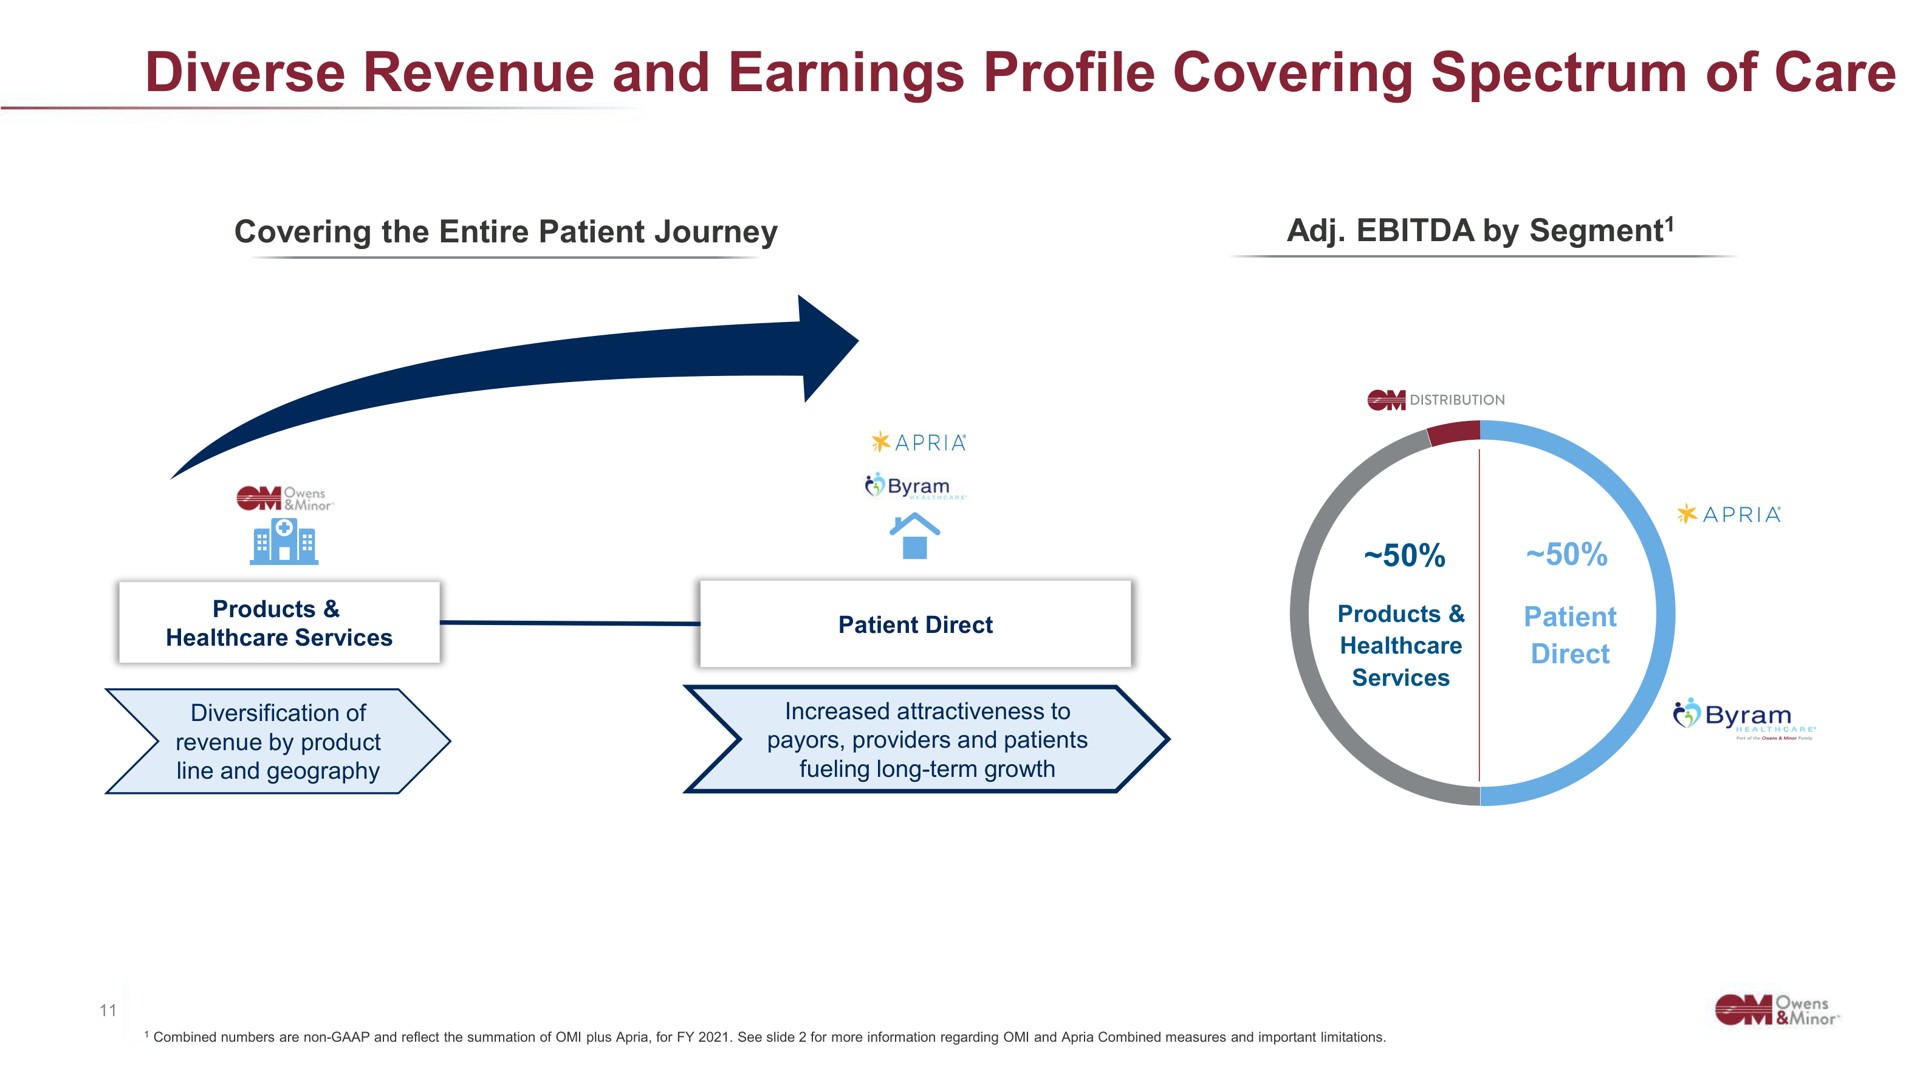 diverse revenue and earnings profile covering spectrum of care | Owens&Minor